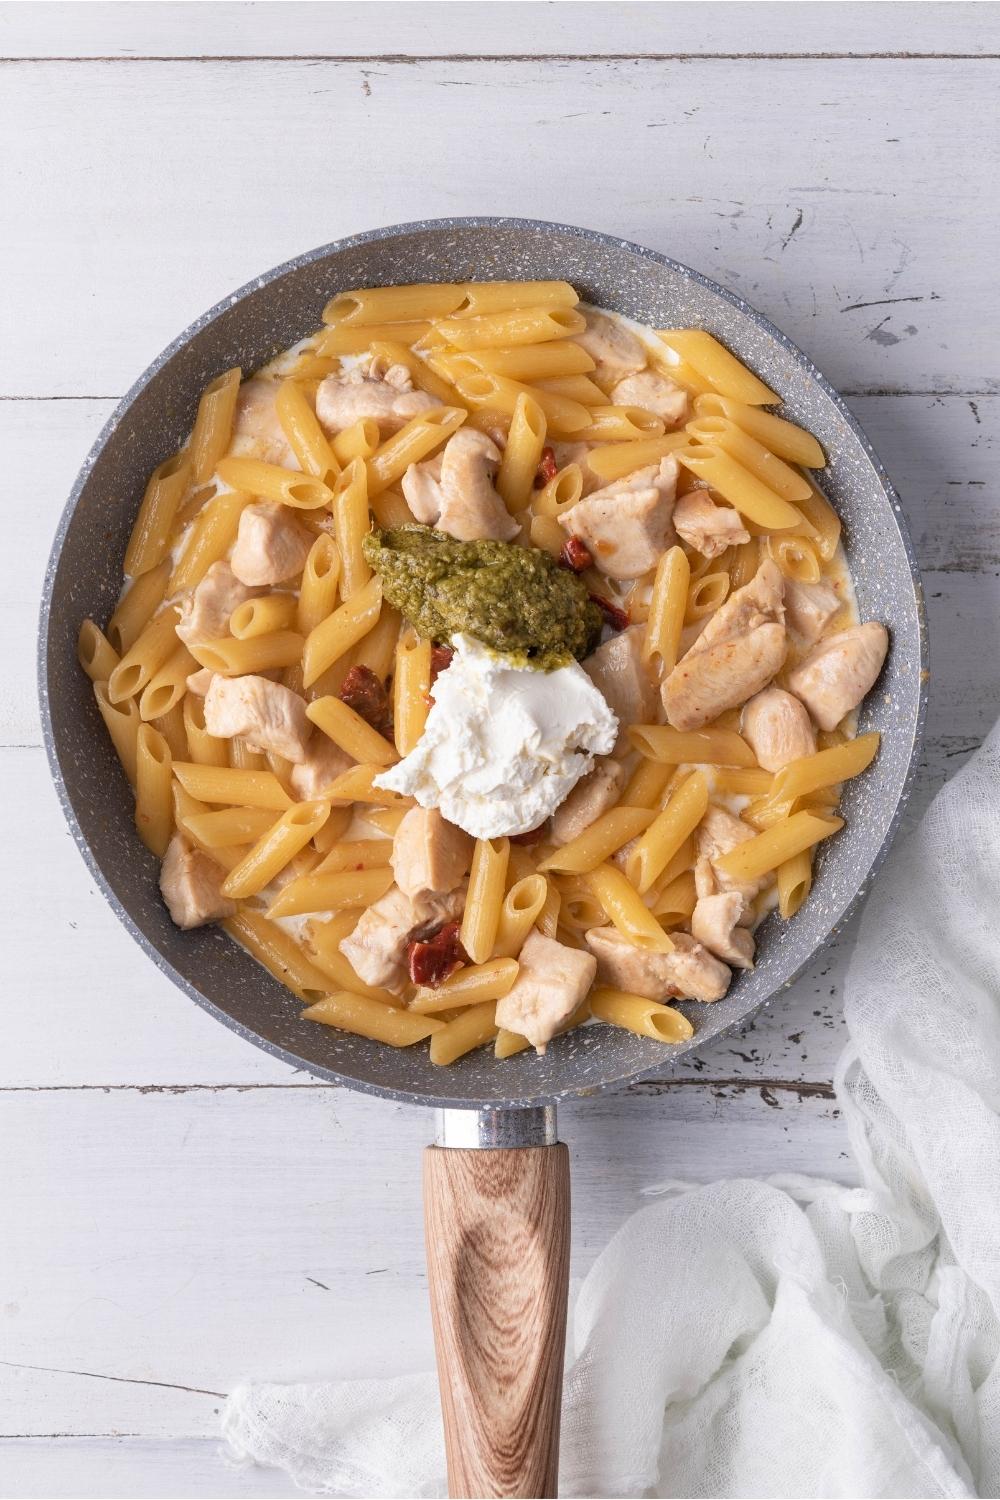 Skillet with pesto chicken pasta ingredients, pesto and cream cheese freshly added.